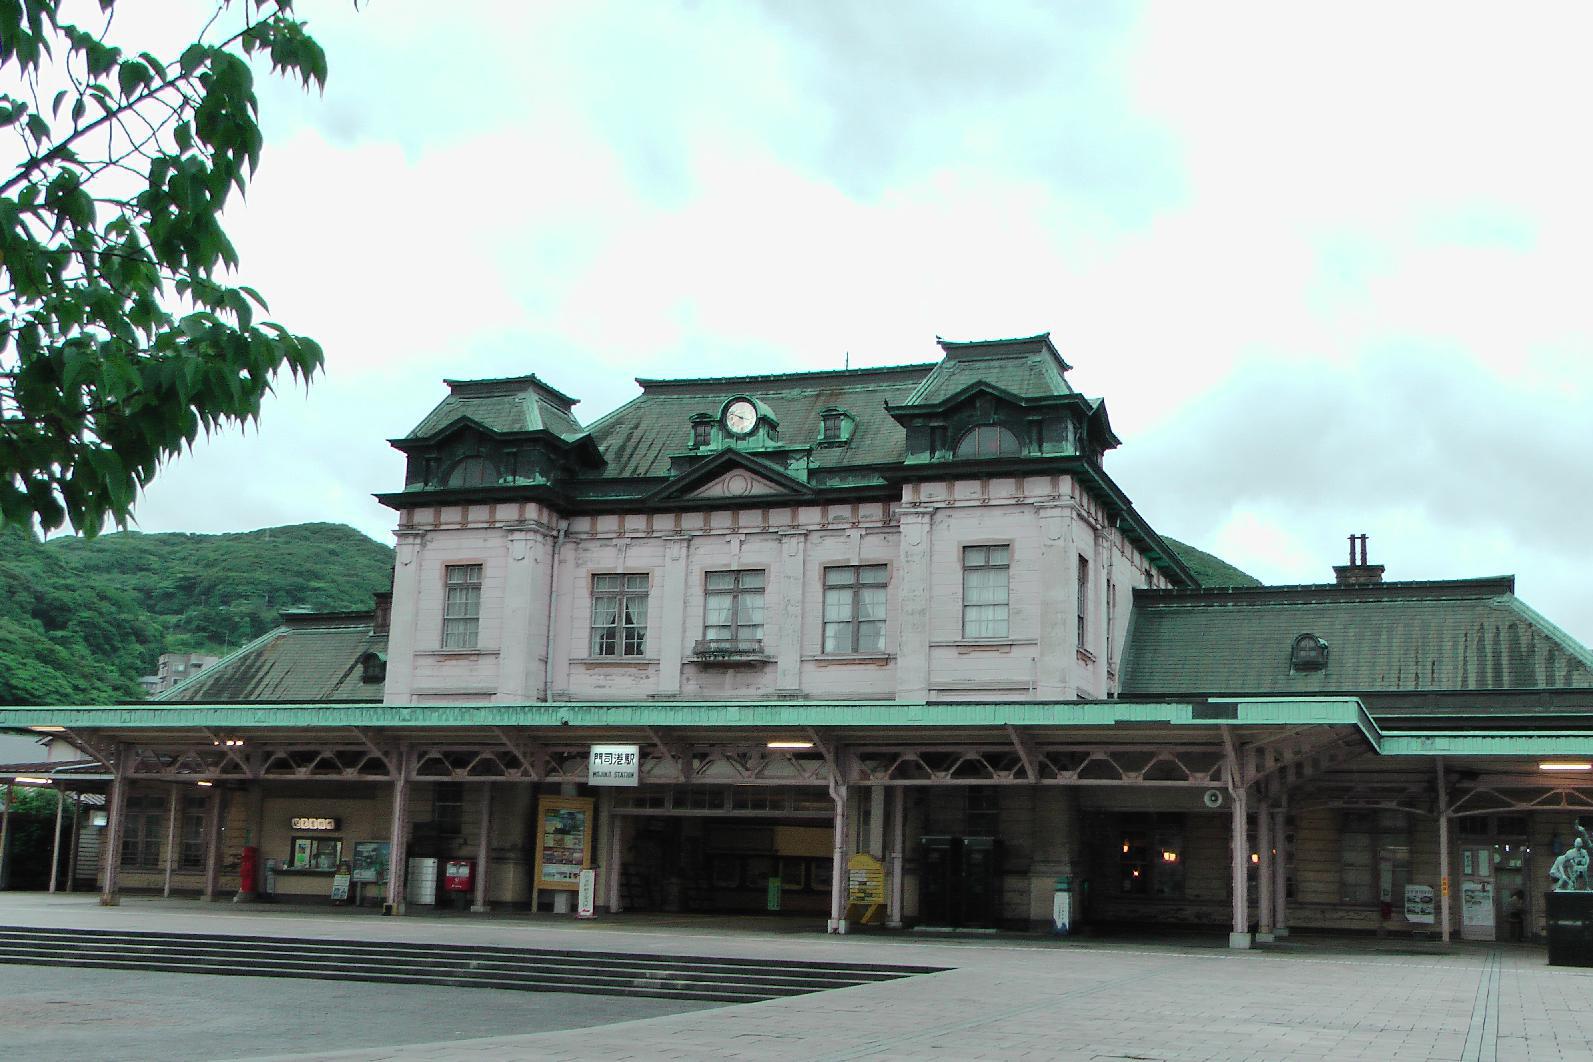 Moji-kou station. A replic of the historic terminus station of Rome